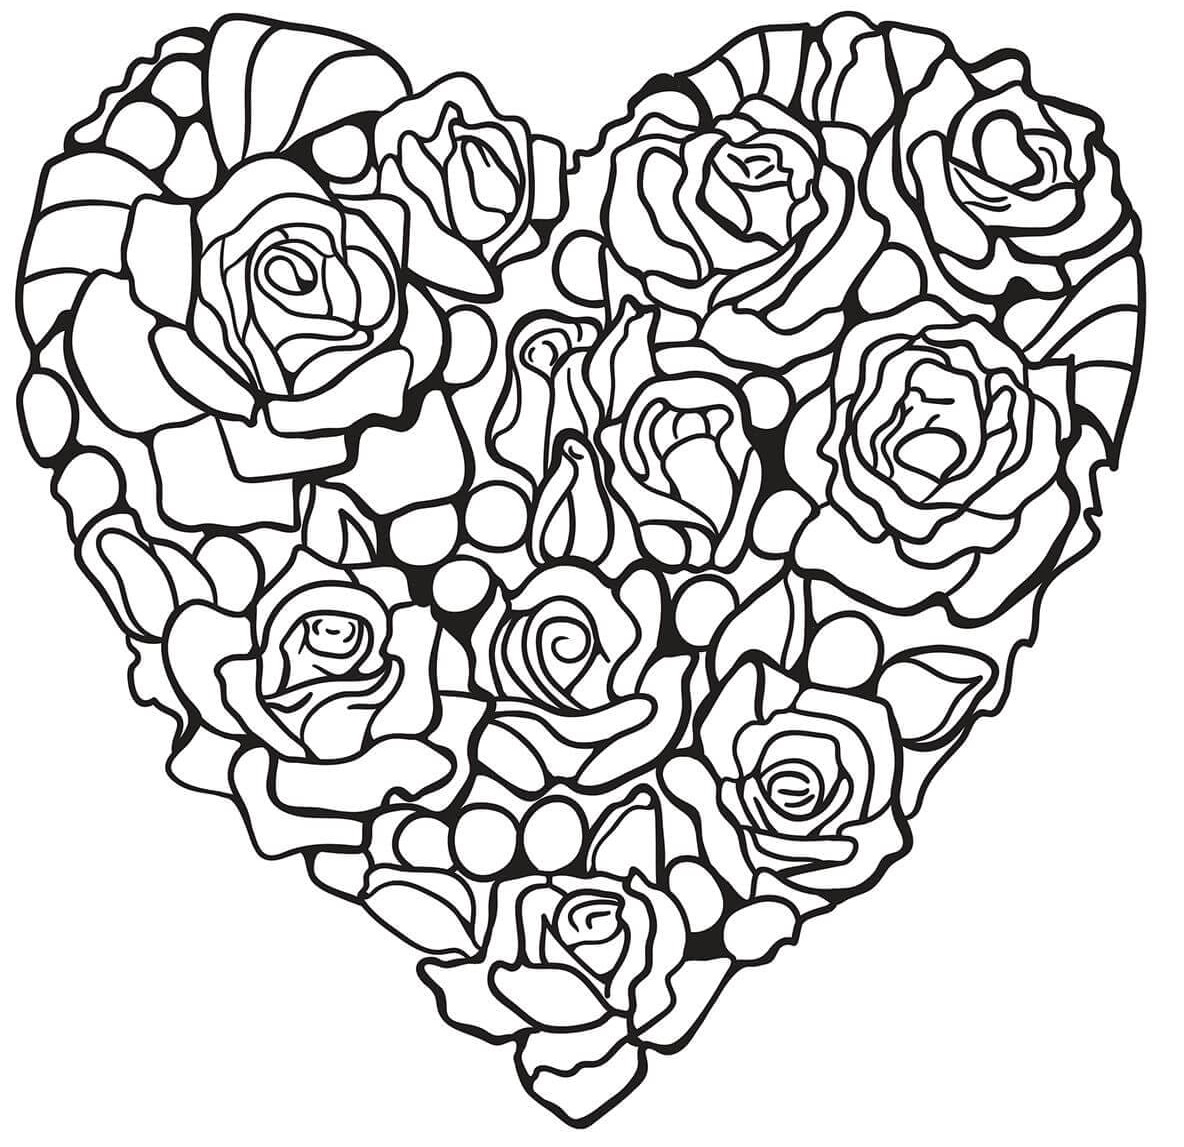 Rosa Hear By Flowers And Roses Coloring Page